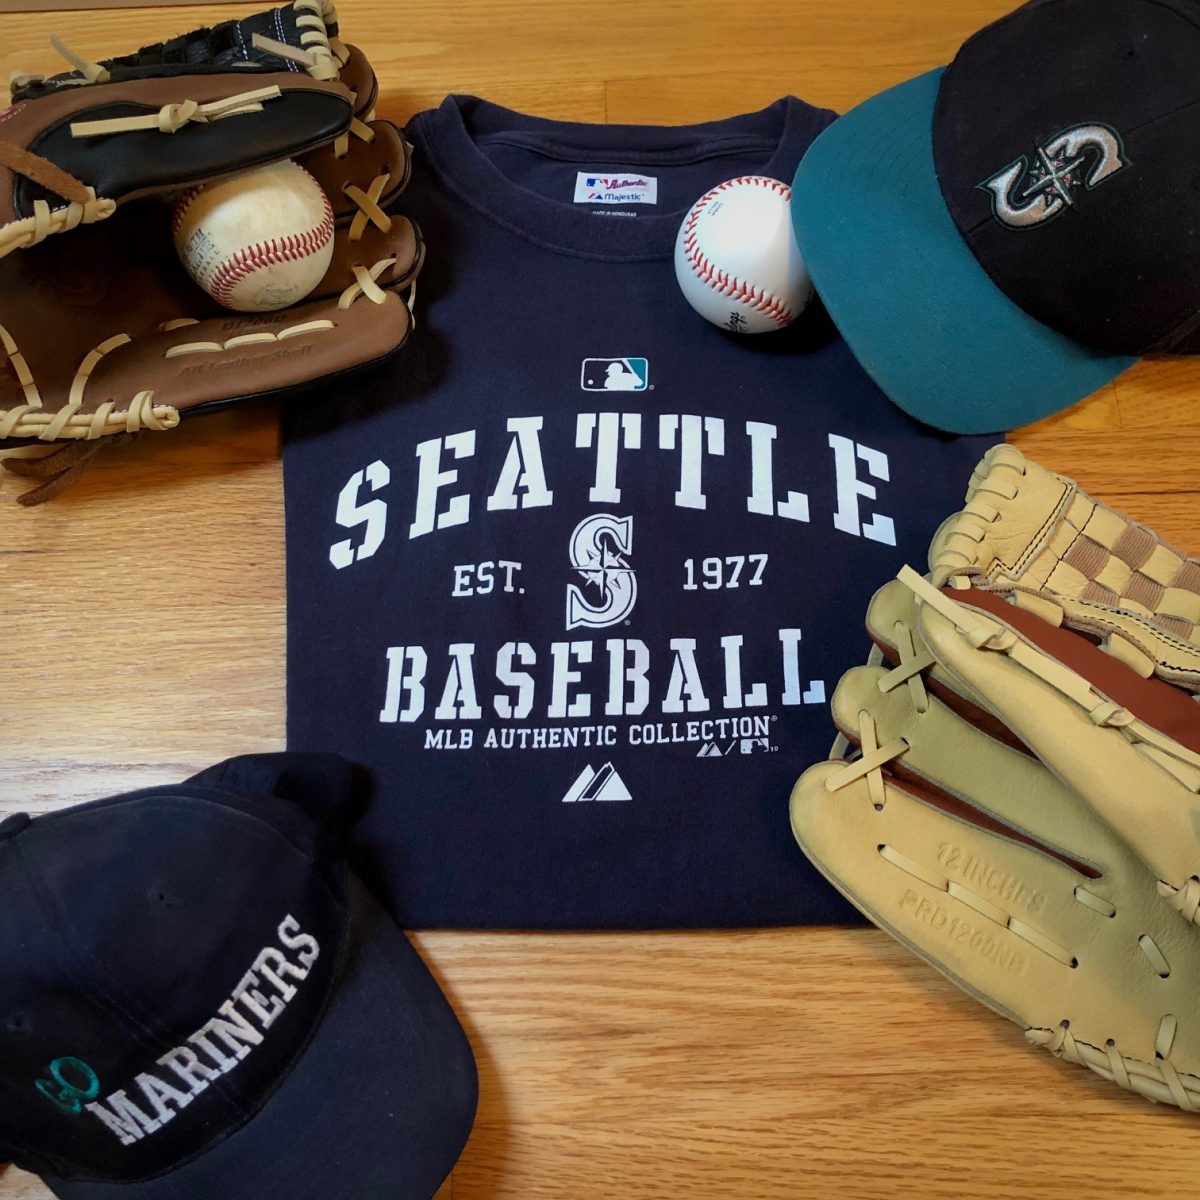 Over+the+years+Seattle+Mariner+enthusiast%2C+Gary+Axtell%2C+has+collected+various+sports+merchandise.+